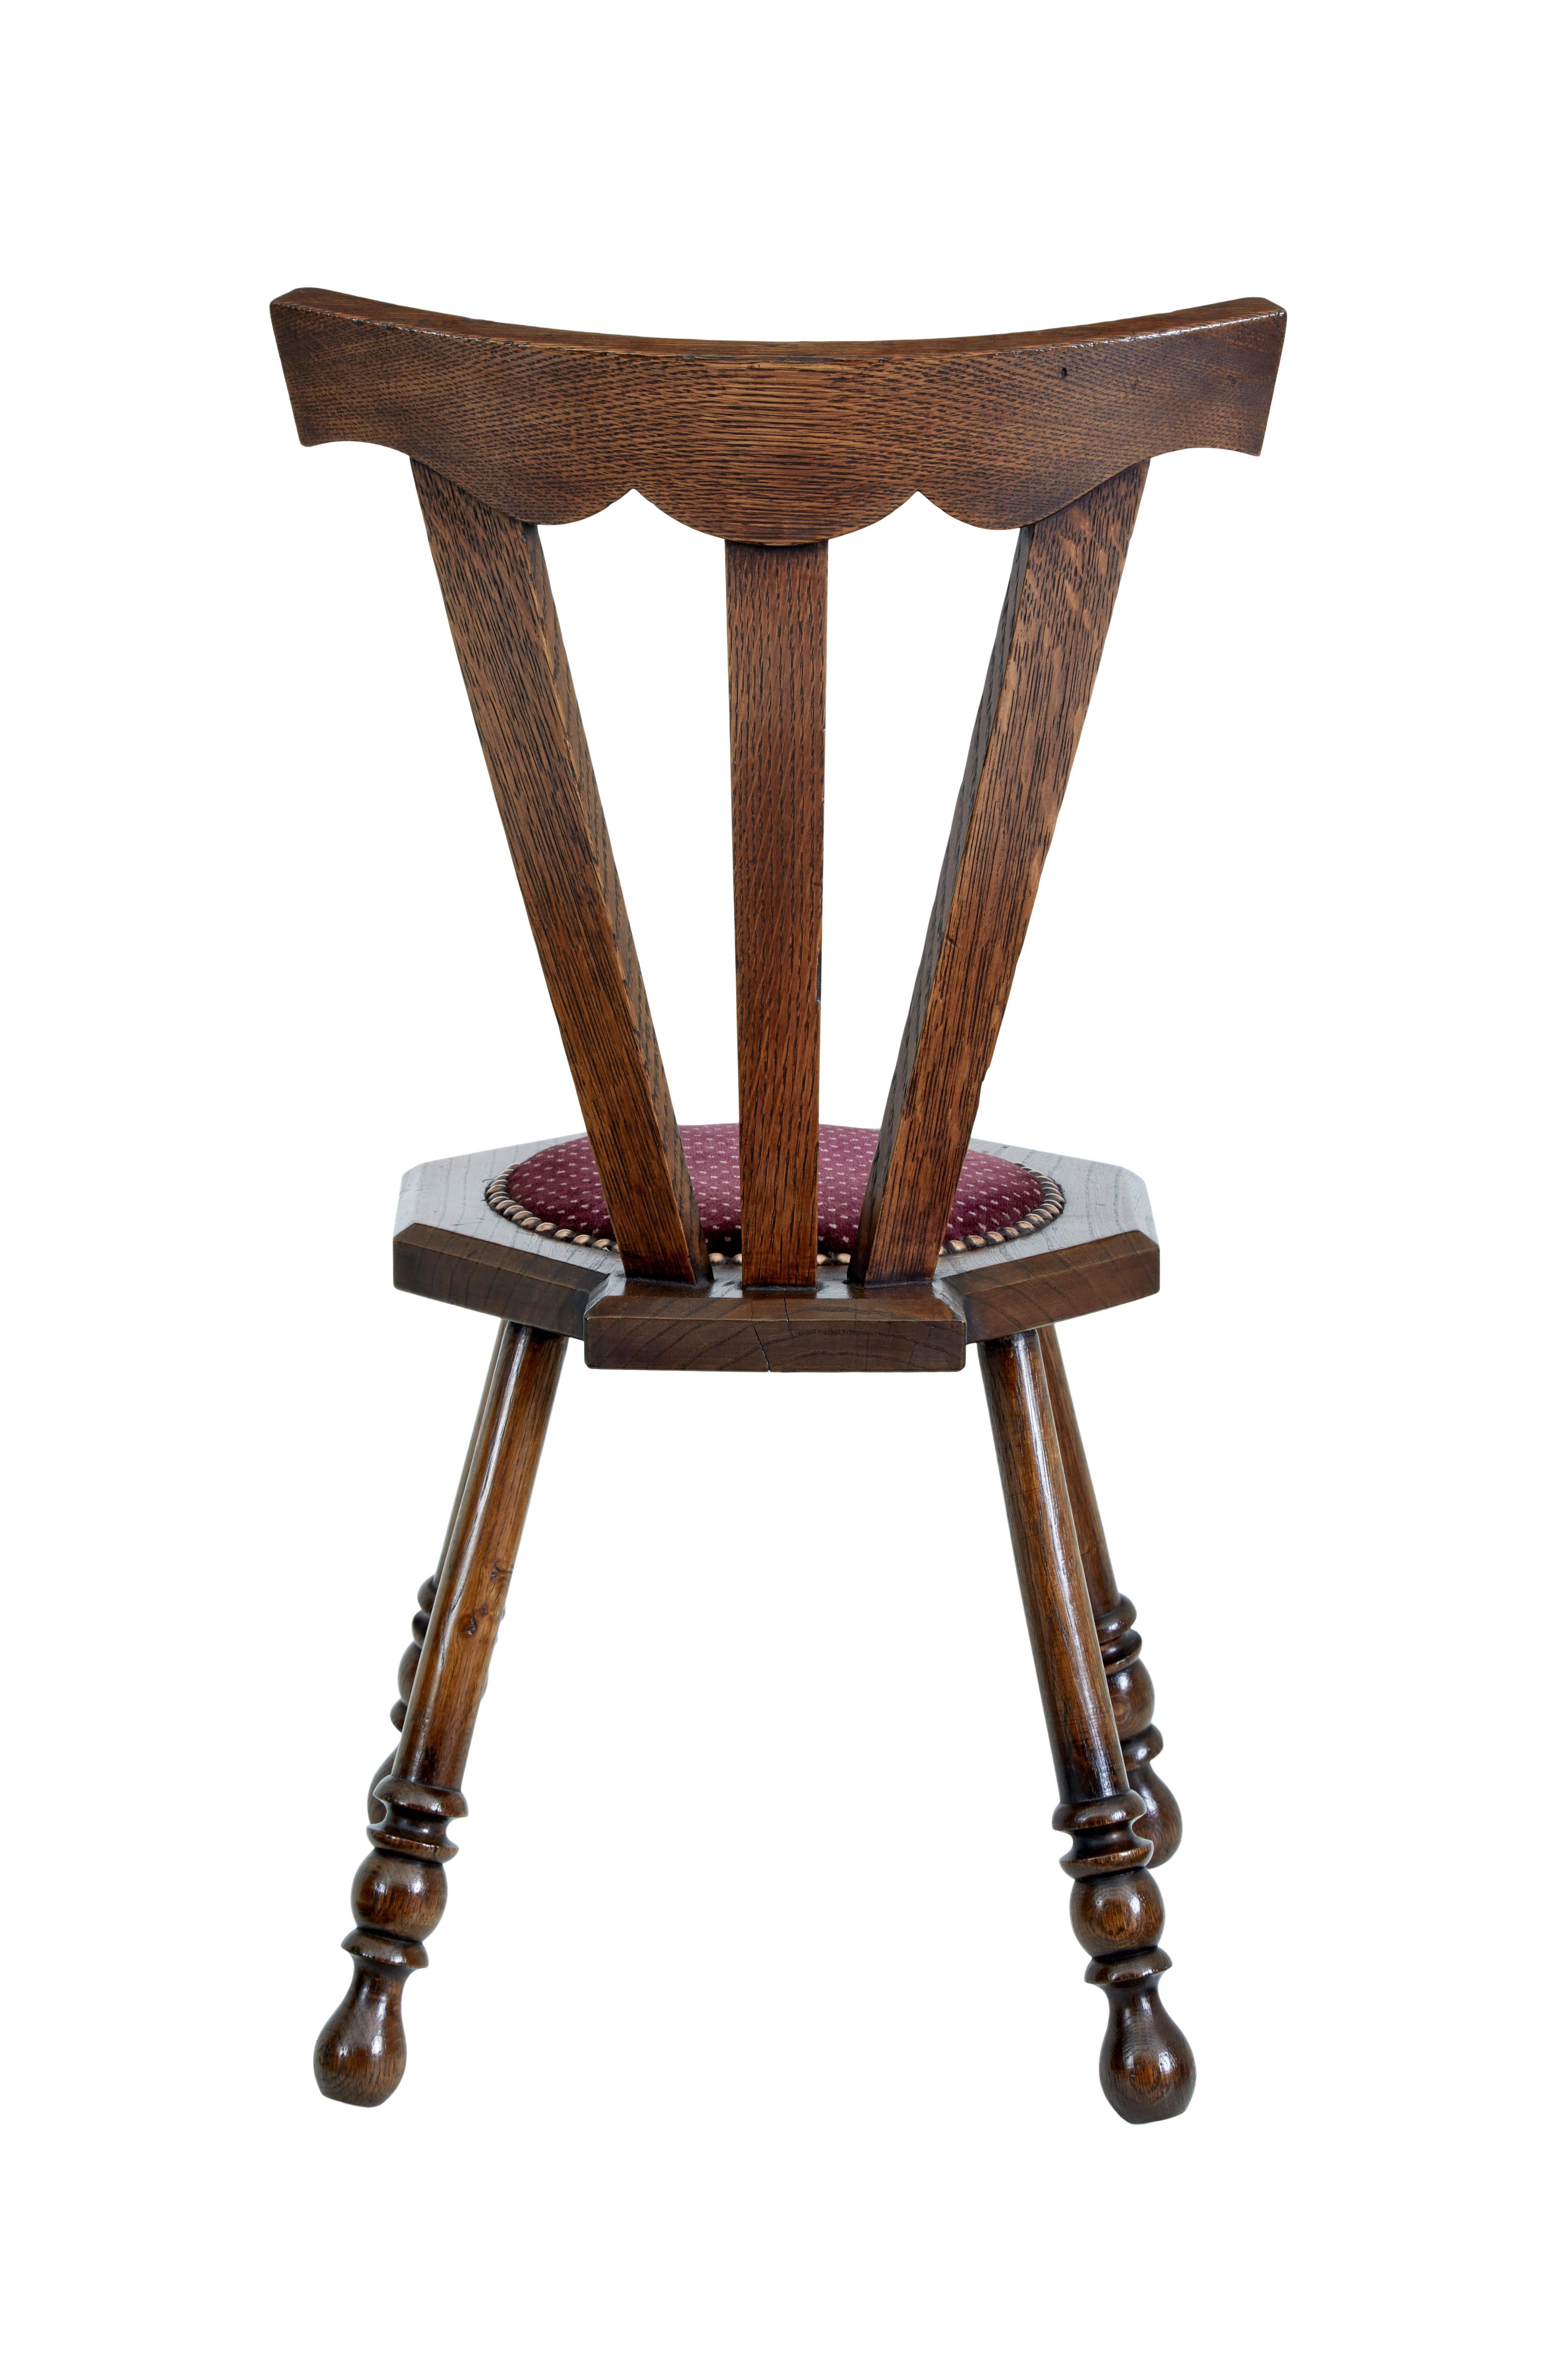 English Early 20th century oak arts and crafts childs chair For Sale